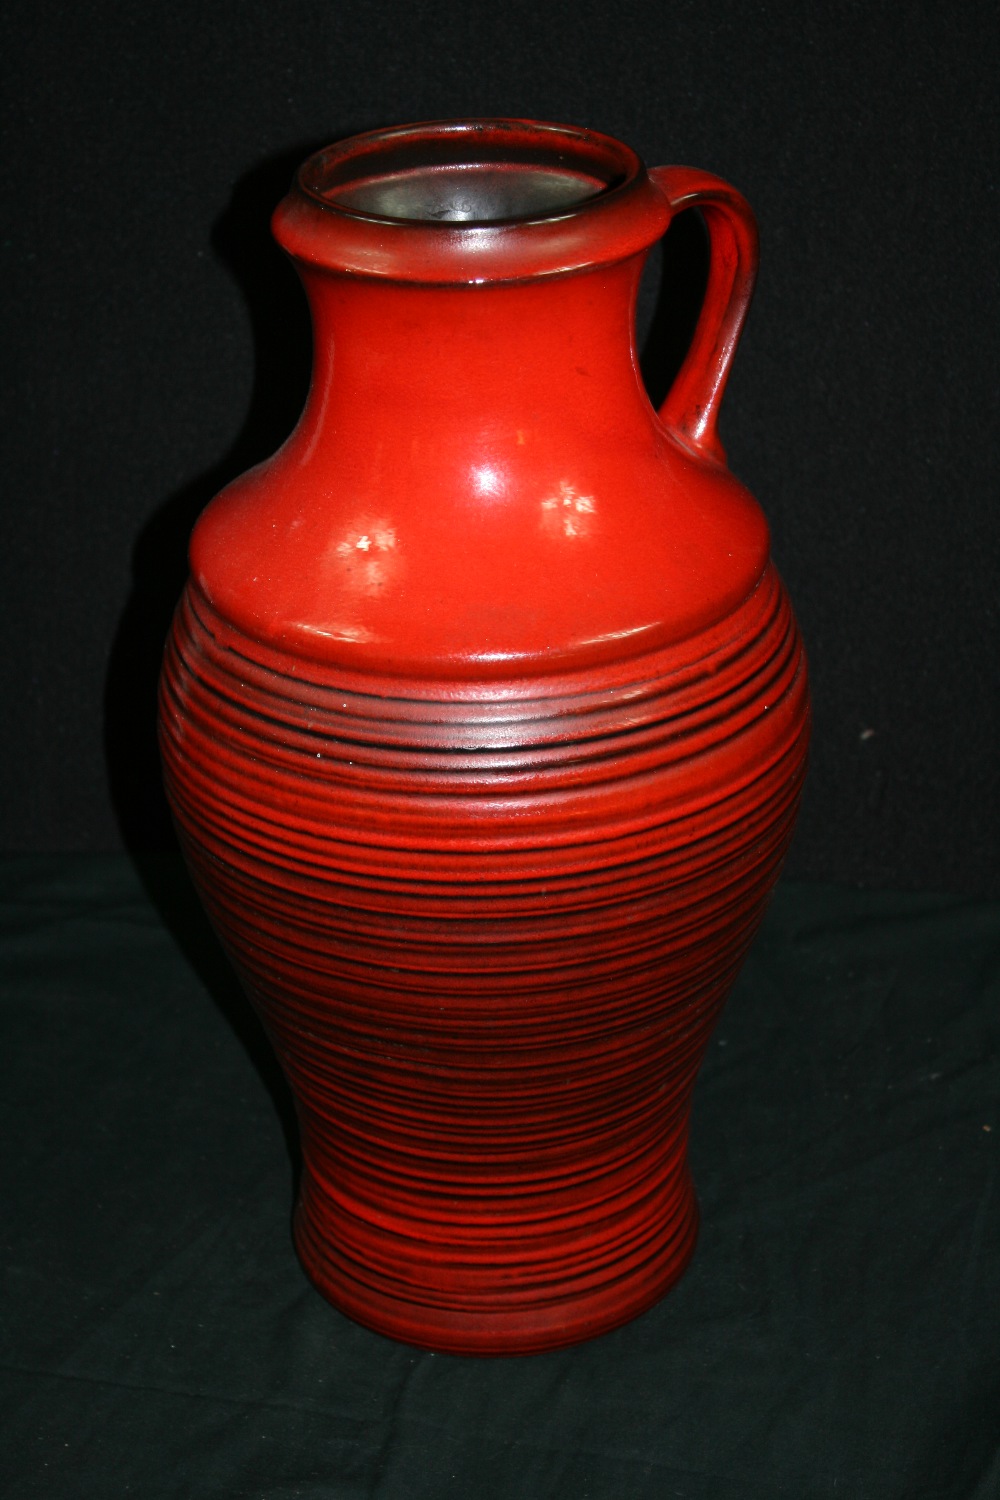 VASE - Large red glazed vase, possibly West German, with the serial number 903 13 45 stamped to